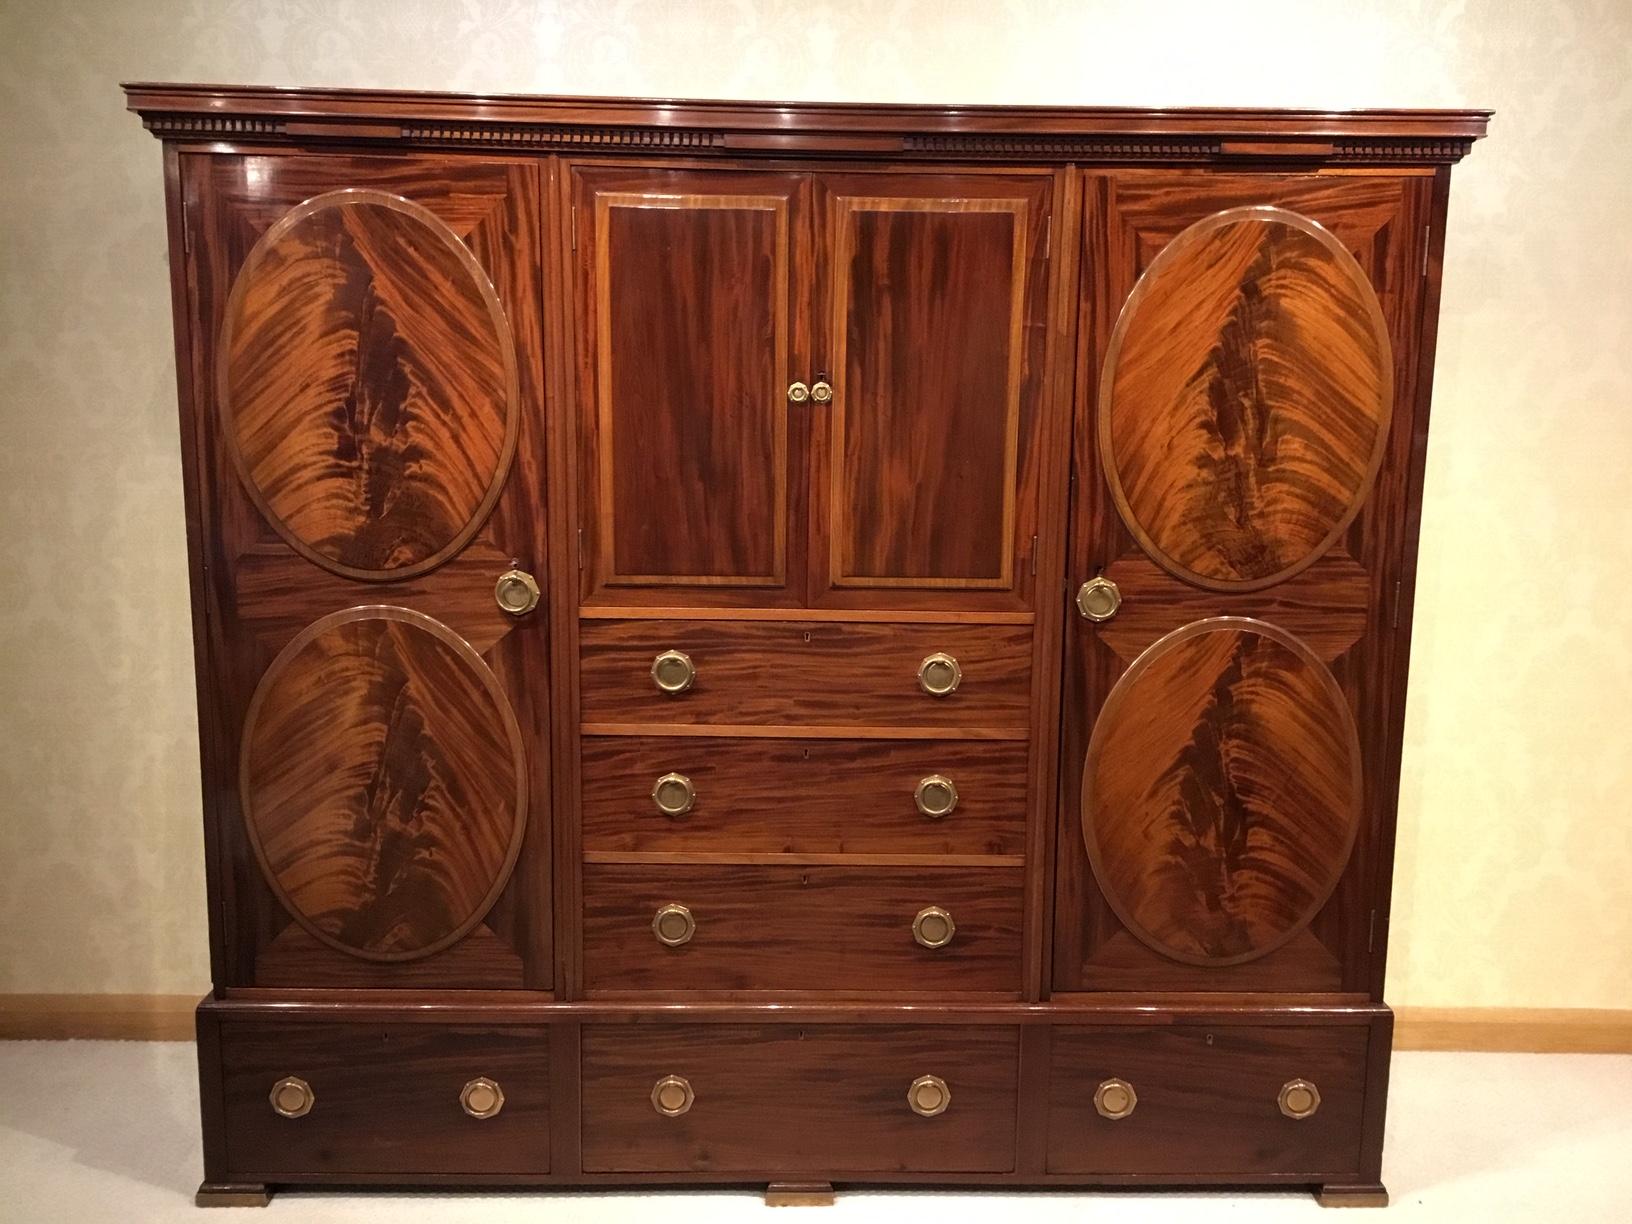 Mahogany Arts & Crafts Period Antique Wardrobe by Morris & Co For Sale 6